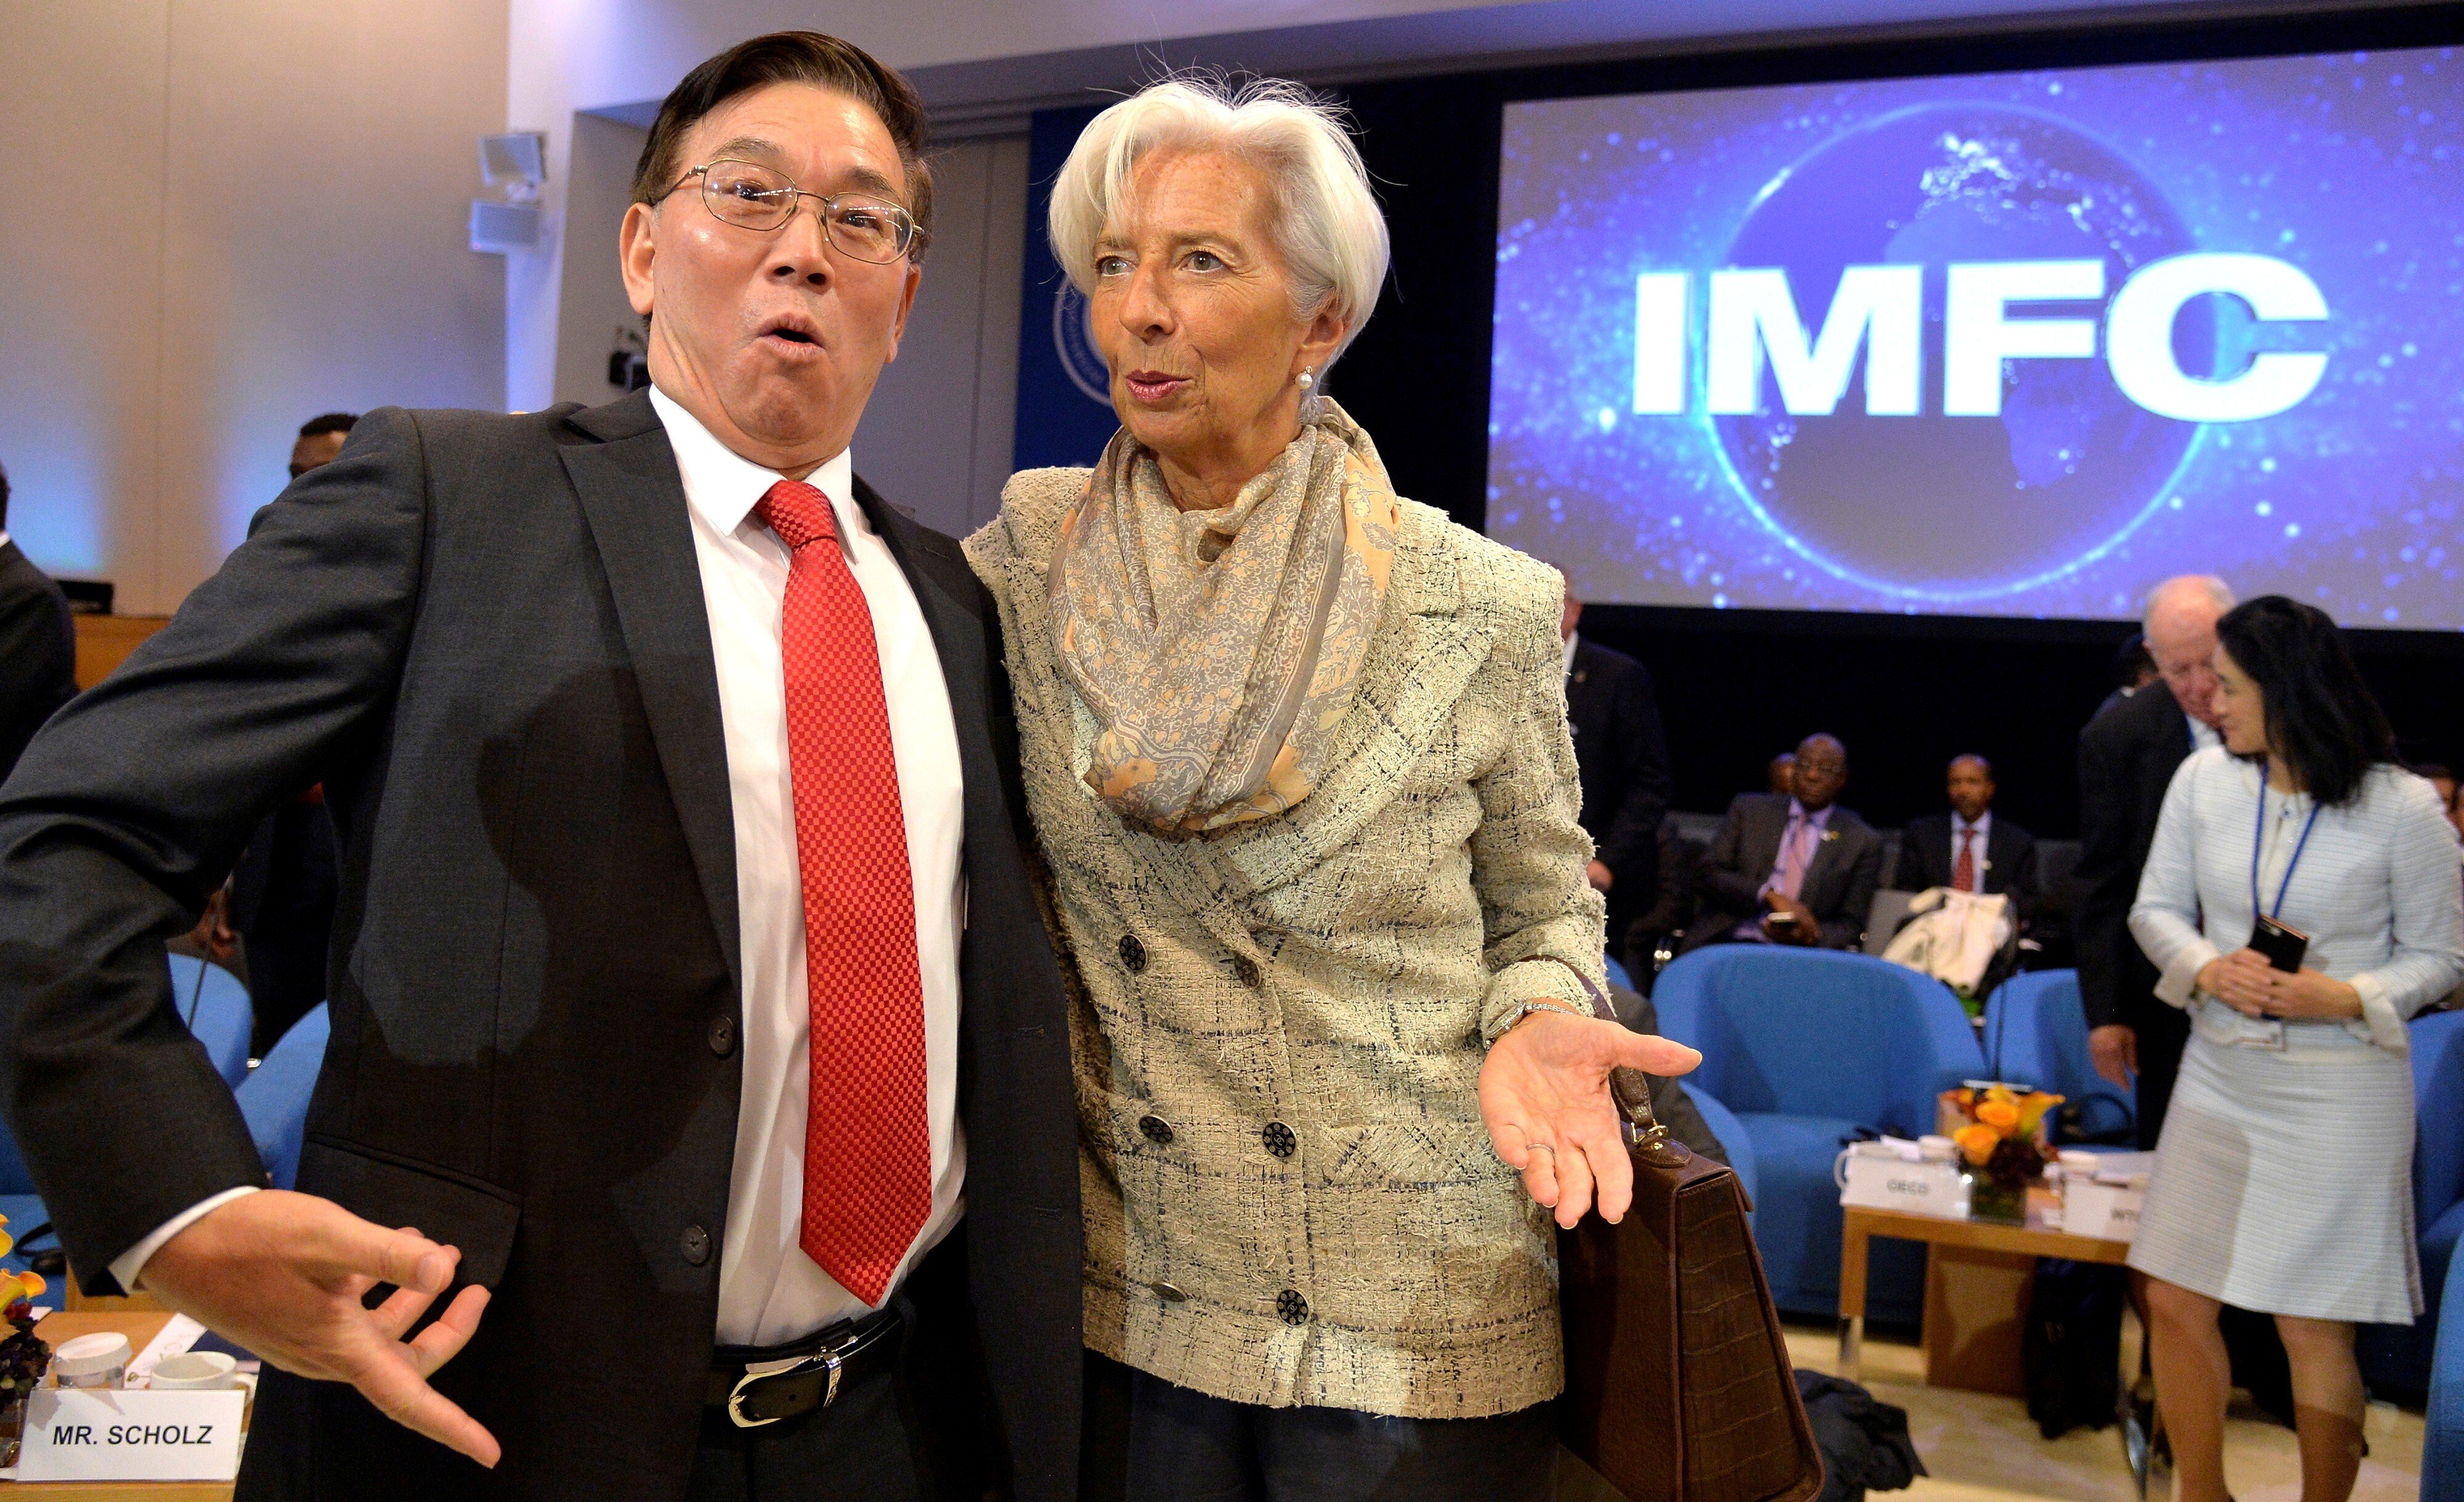 International Monetary Fund China staff member Lin Jianhai and European Central Bank president Christine Lagarde attend the IMF Finance Committee Plenary on October 19 last year. Photo: Reuters